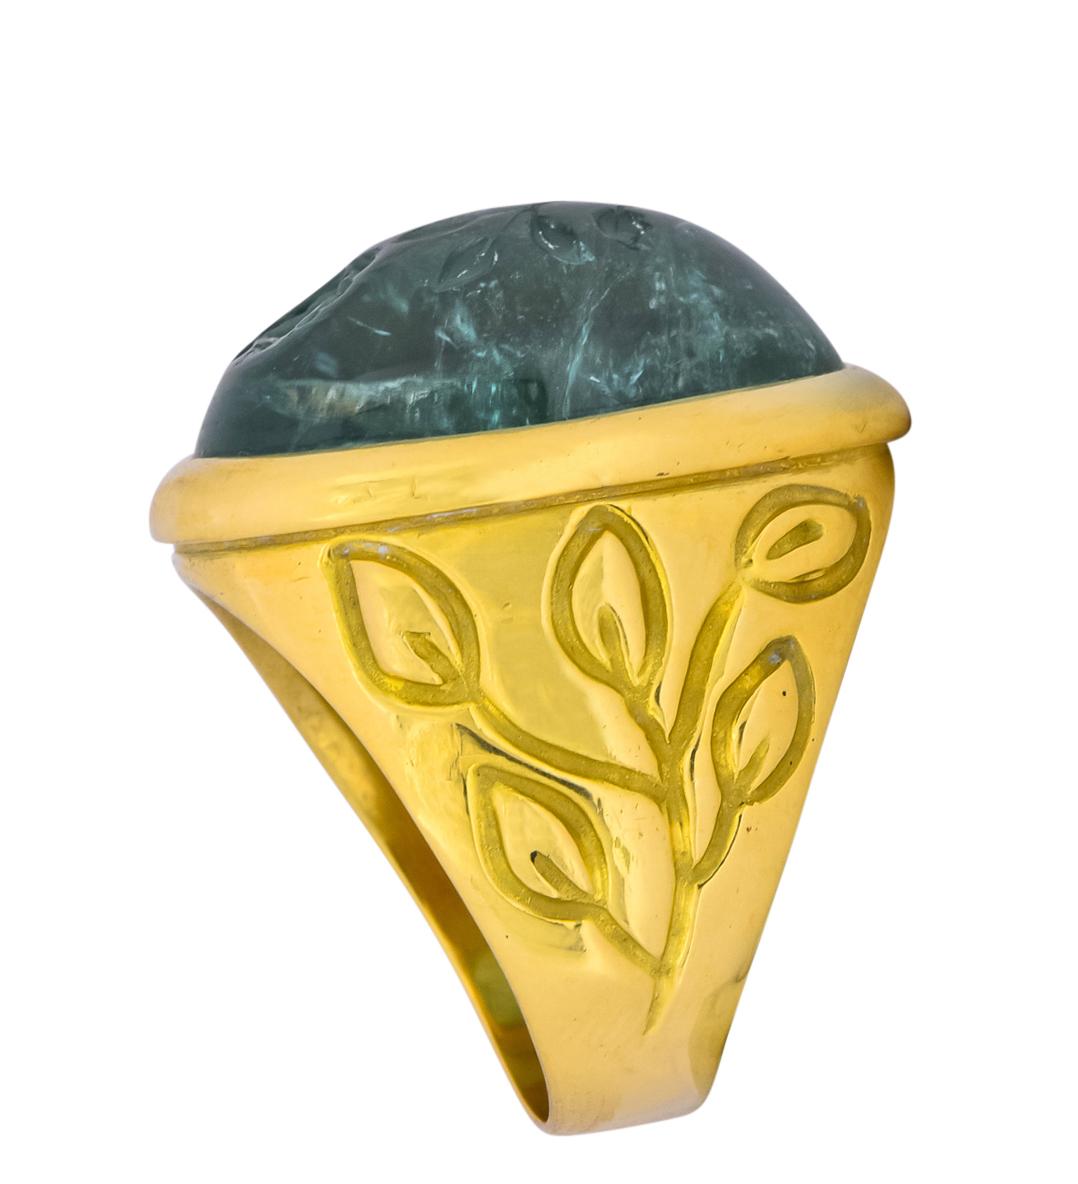 Centering an oval cabochon aquamarine deeply carved depicting a stemmed rose, measuring approximately 1 x 7/8 inch

Aquamarine is bezel set in a polished gold surround, semi-transparent and medium-dark greenish-blue in color

With deeply engraved